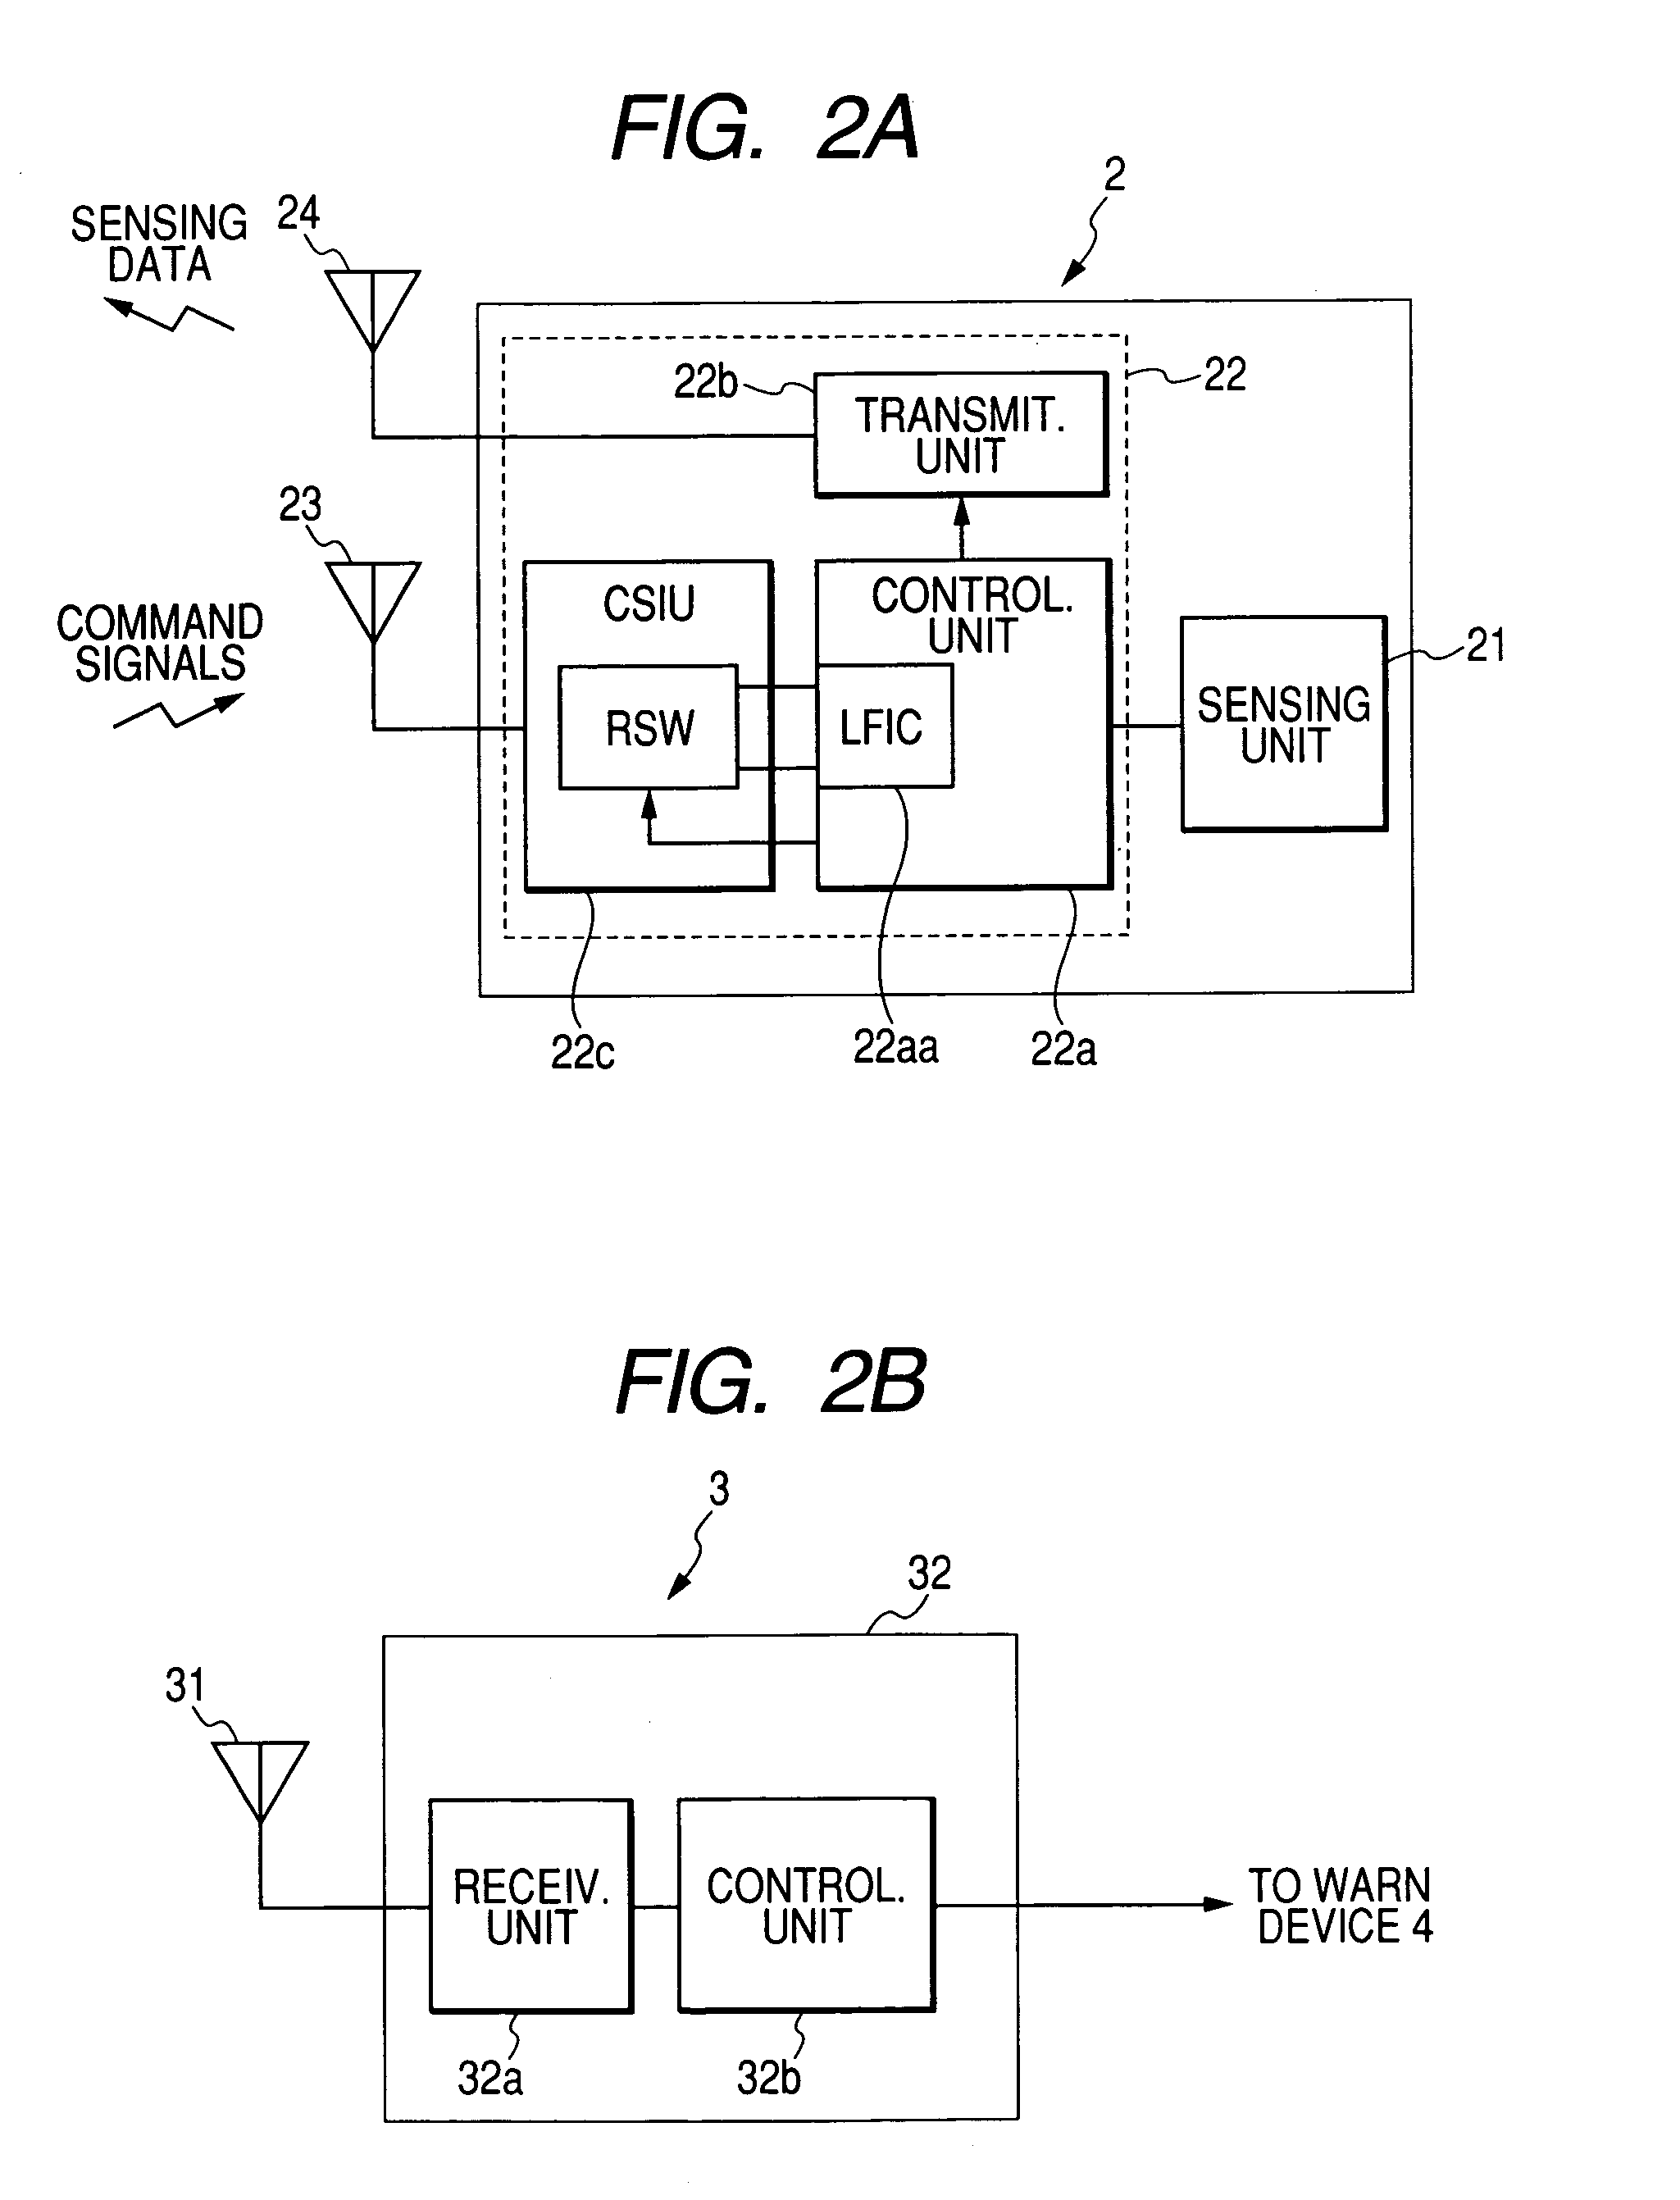 Tire inflation pressure sensing apparatus with command signal receiver having variable receiver sensitivity